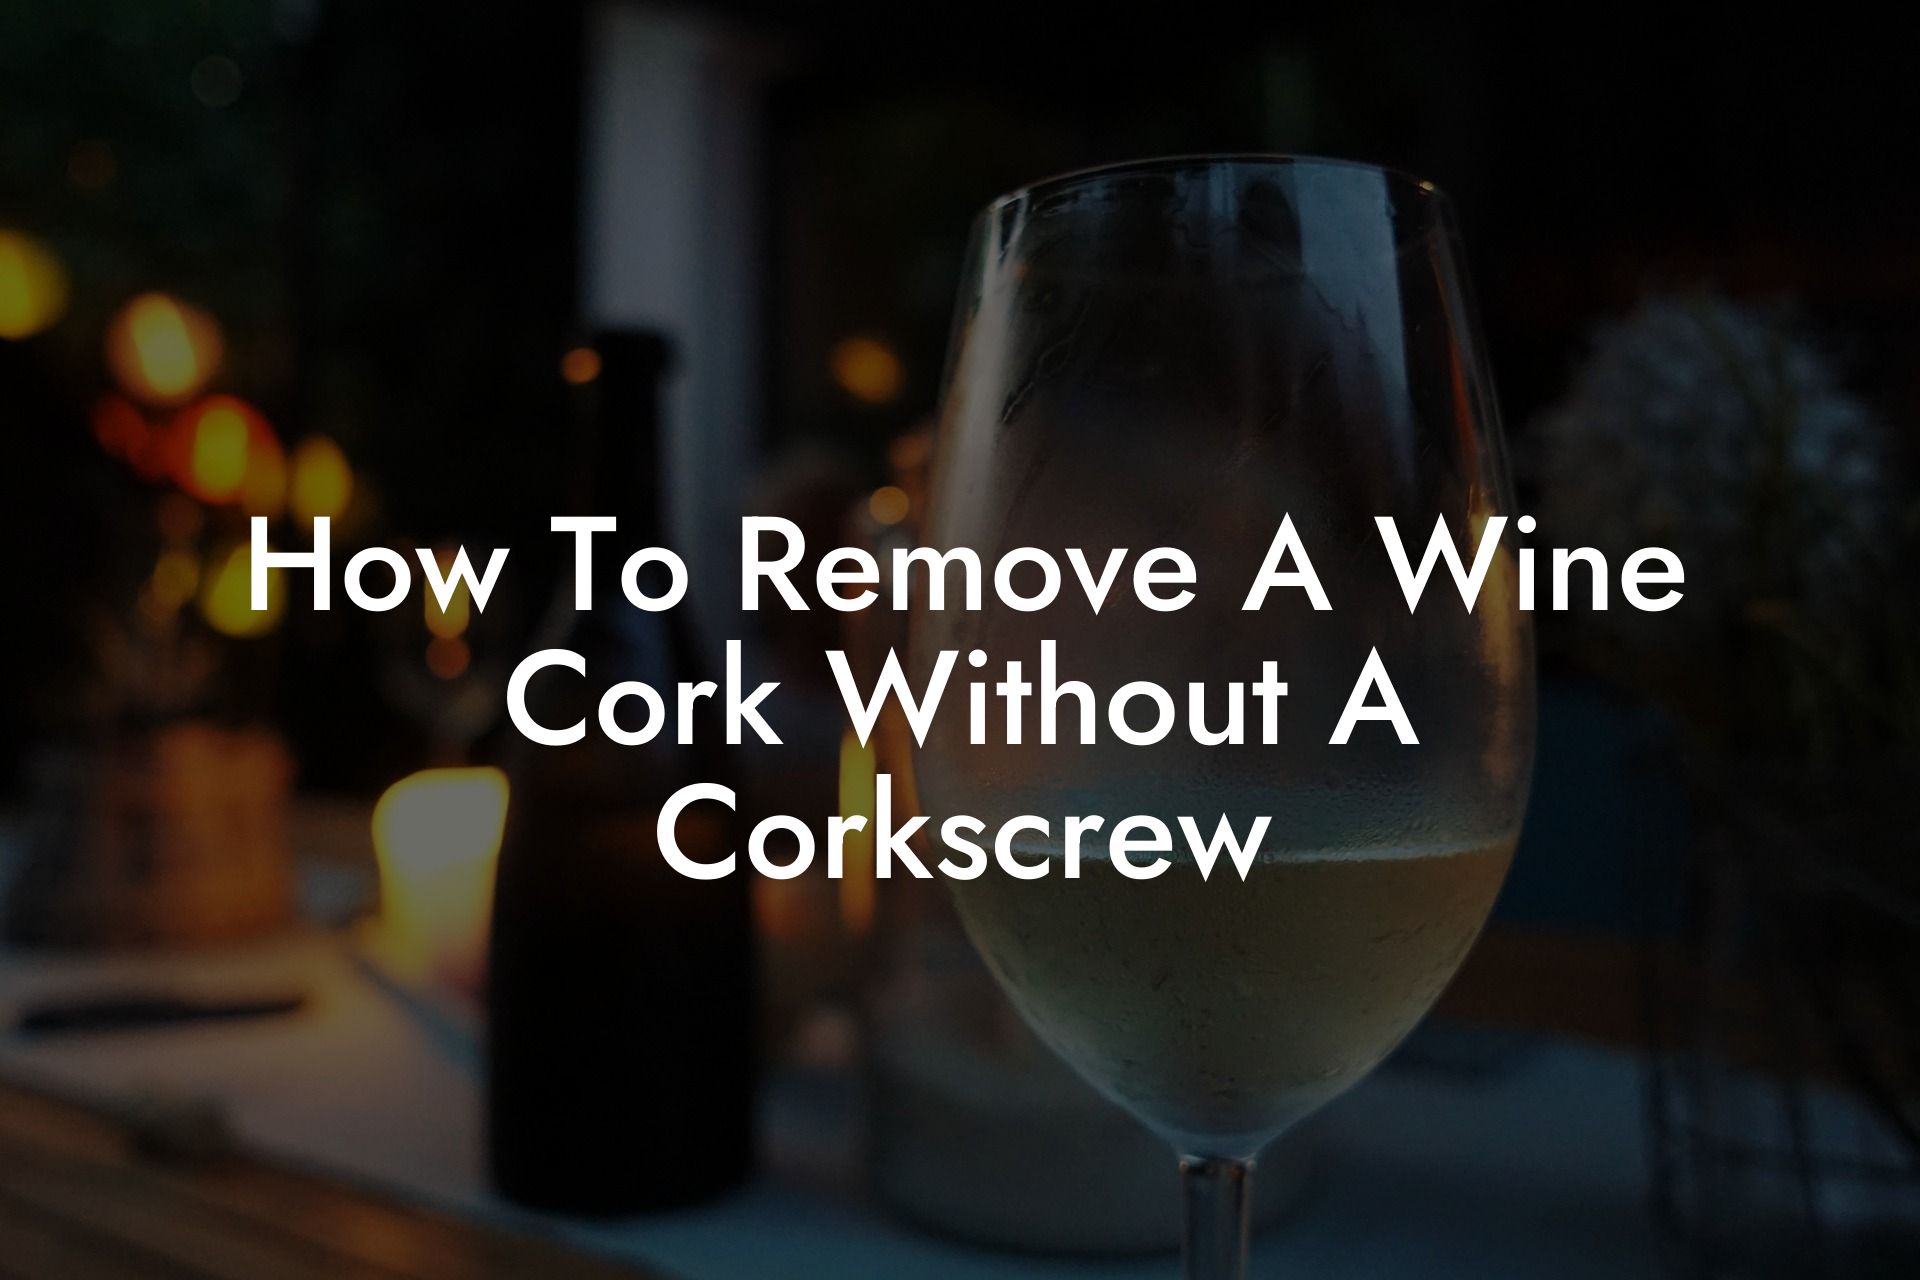 How To Remove A Wine Cork Without A Corkscrew